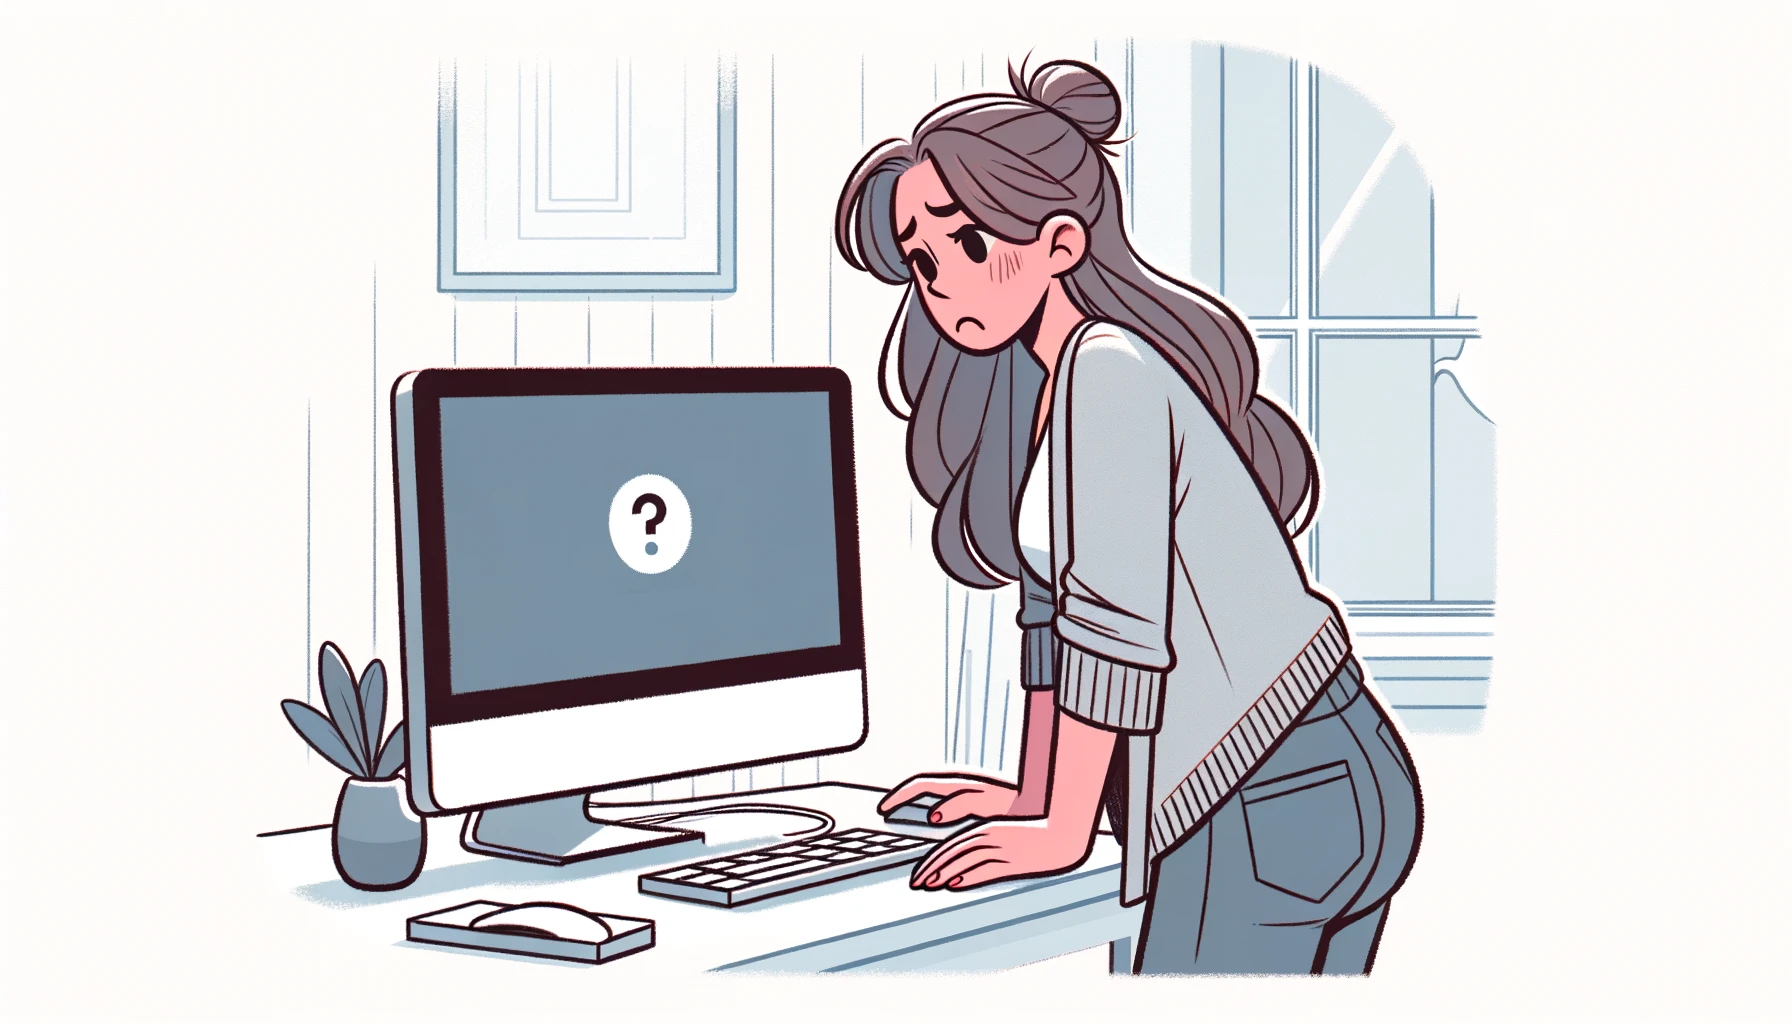 An illustration of a woman looking frustrated and confused in front of a computer that won't start. The scene is set in a home office environment, showing the woman leaning towards the screen, trying to understand the problem. The computer screen is blank, indicating that the PC is not booting up. The style is simple and clean, with minimal background details to keep the focus on the woman and the computer. The illustration is wide.